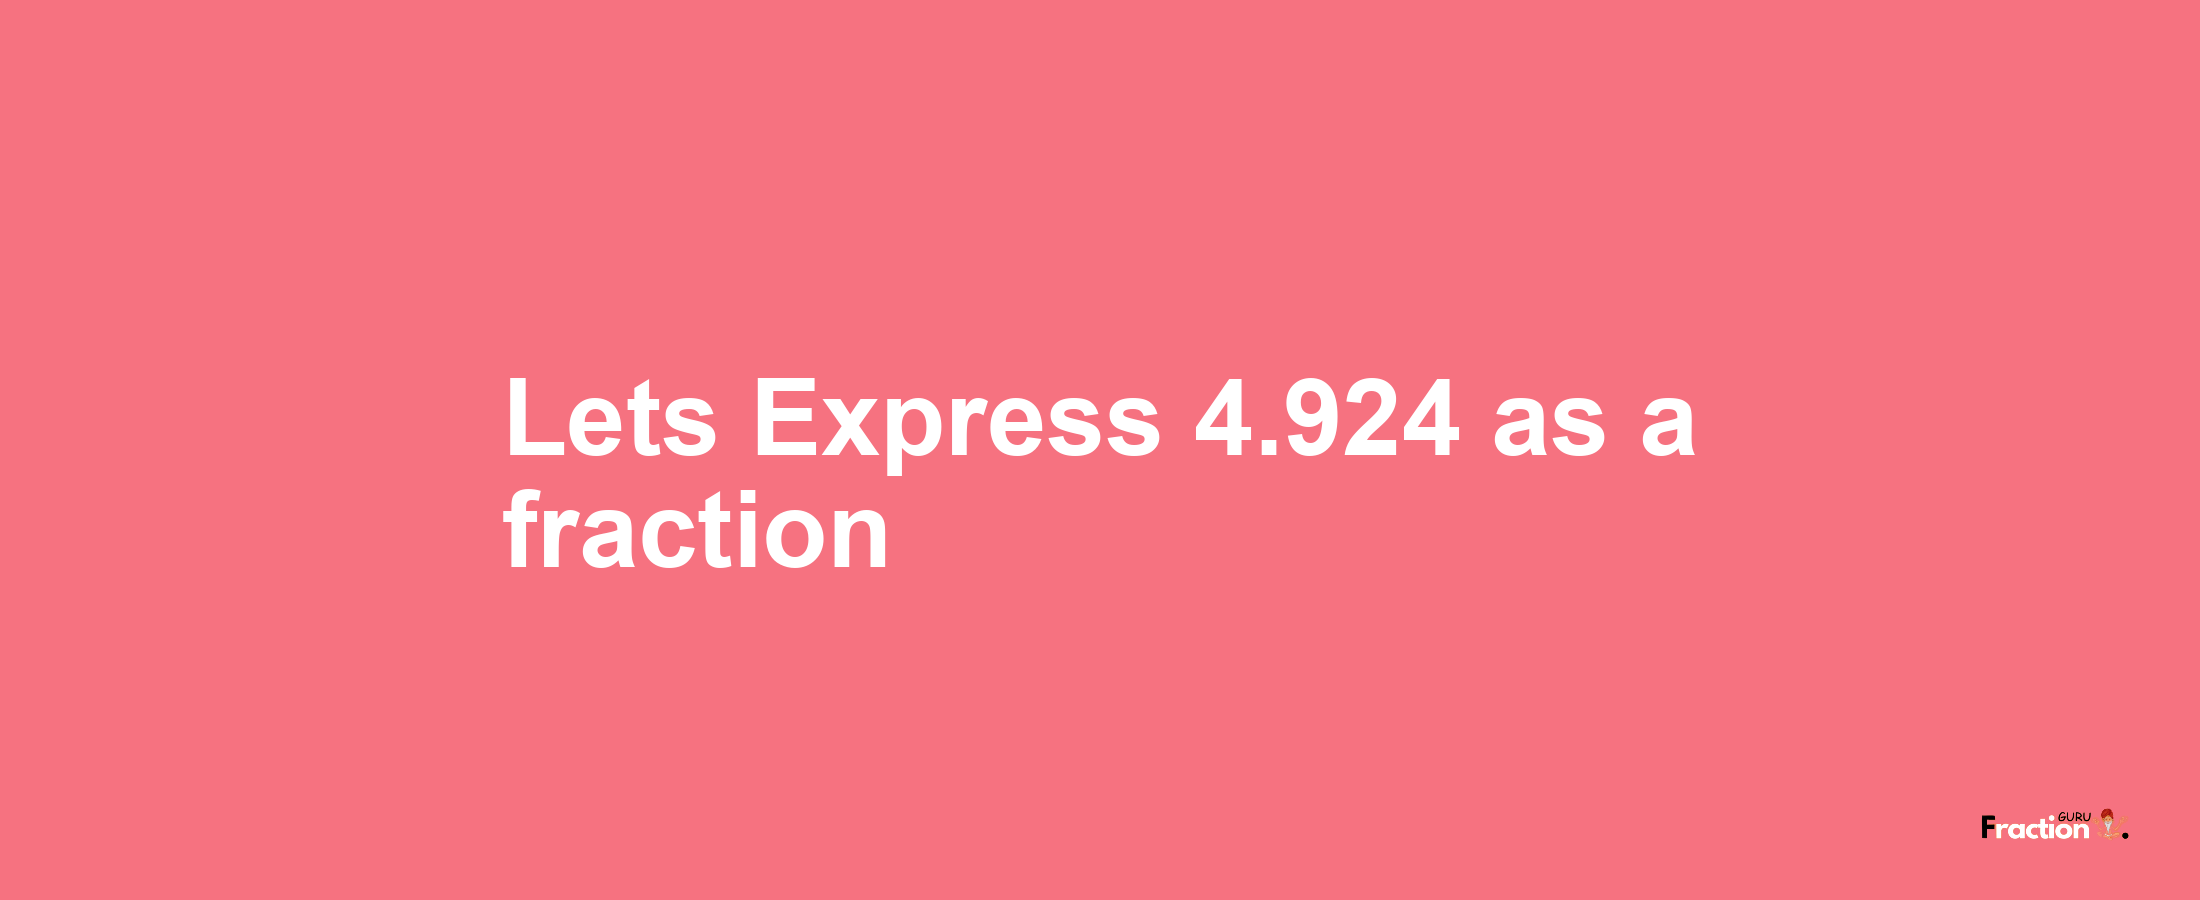 Lets Express 4.924 as afraction